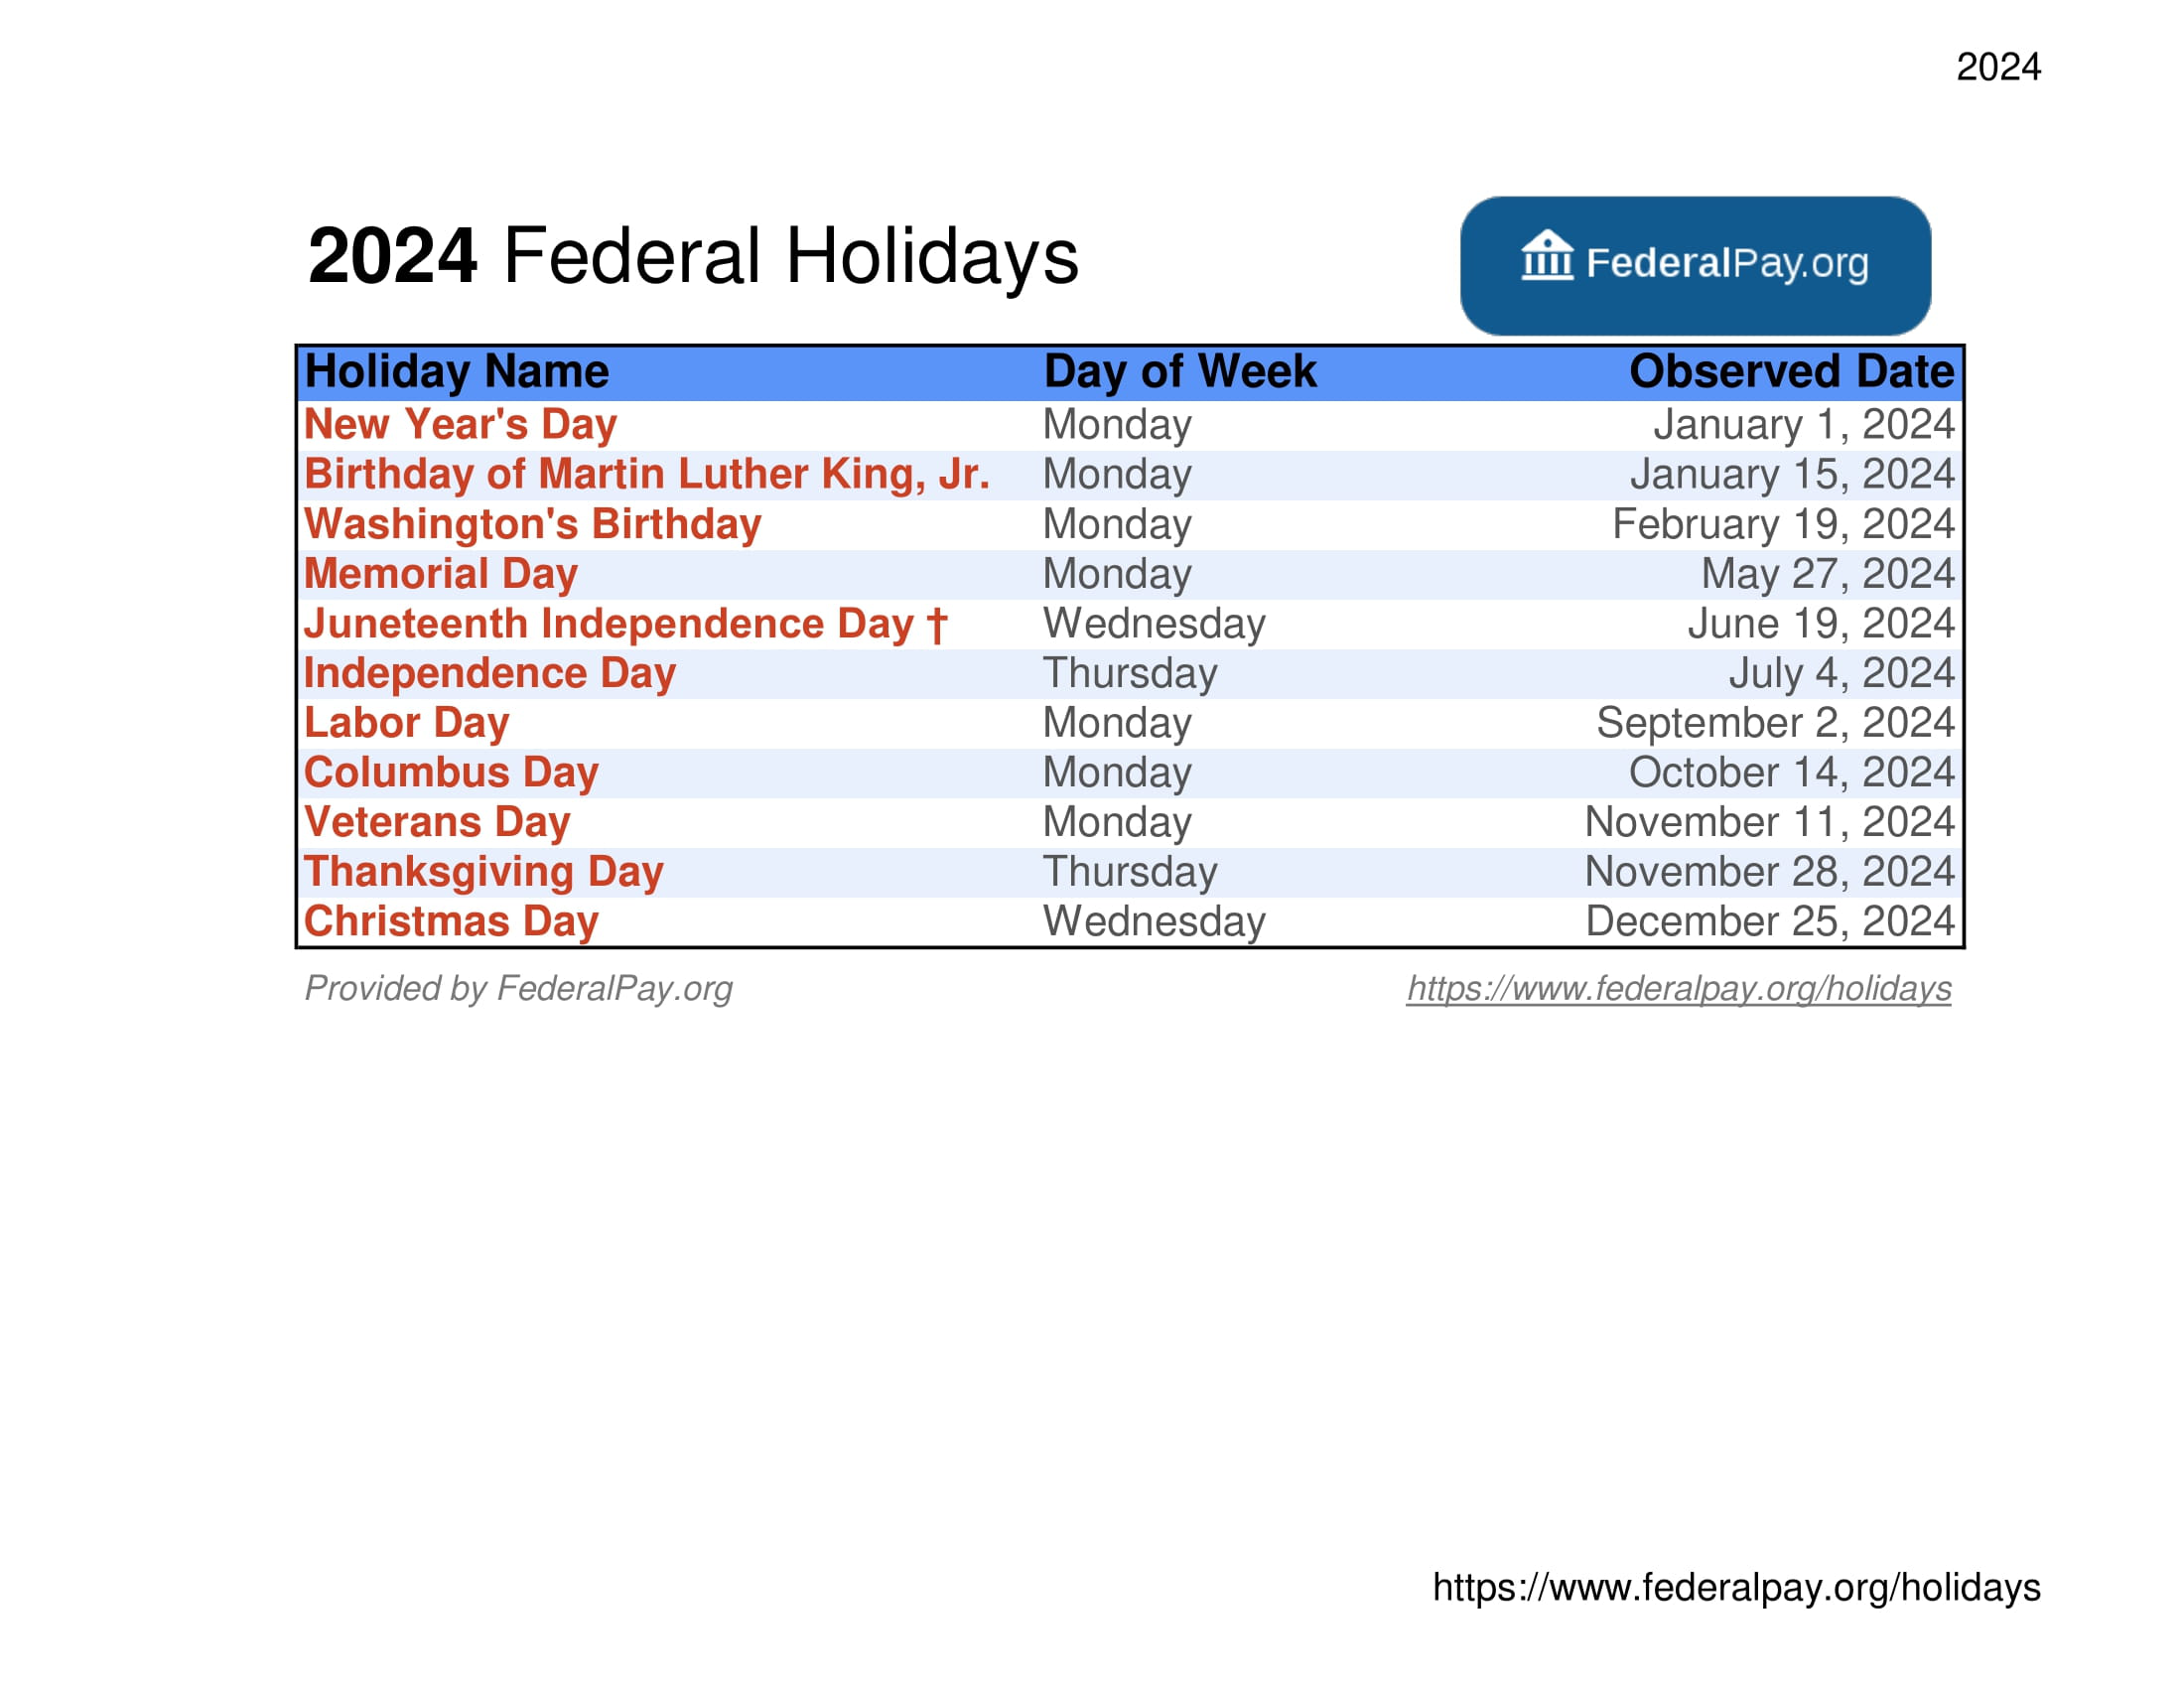 United States Post Office Holiday Hours 2024 Calendar Marie Shanna